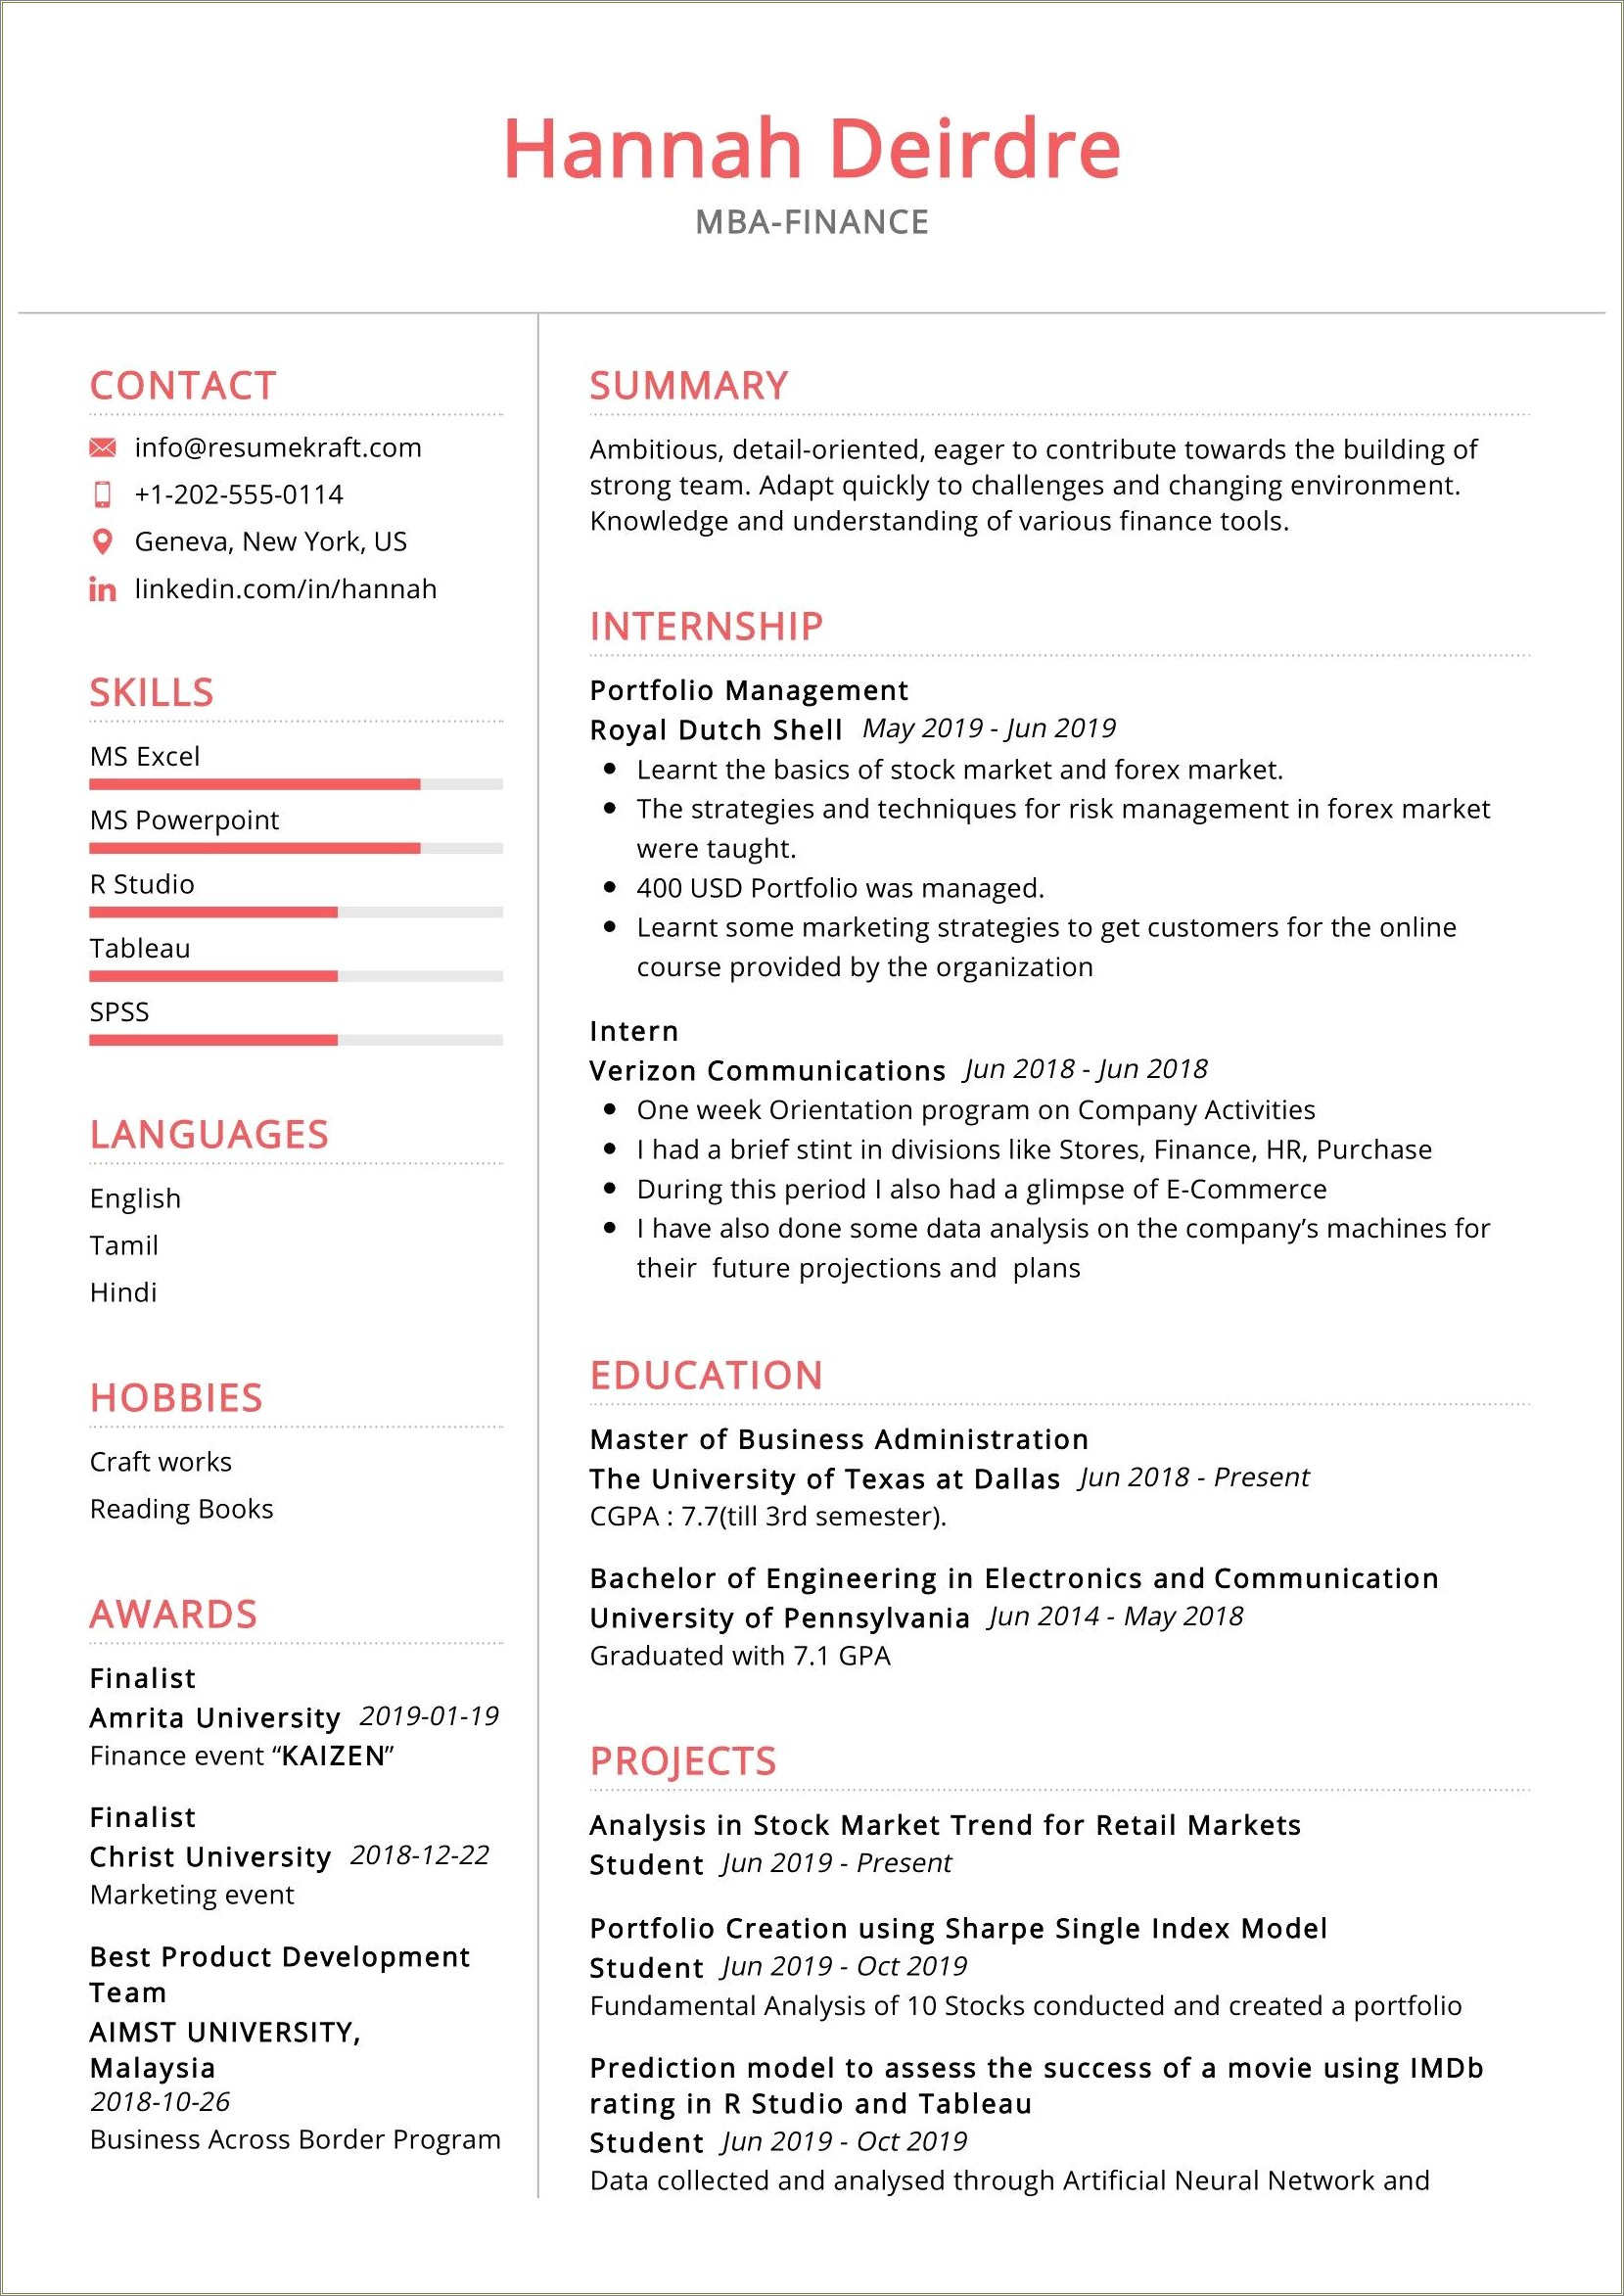 professional resume 2018 template